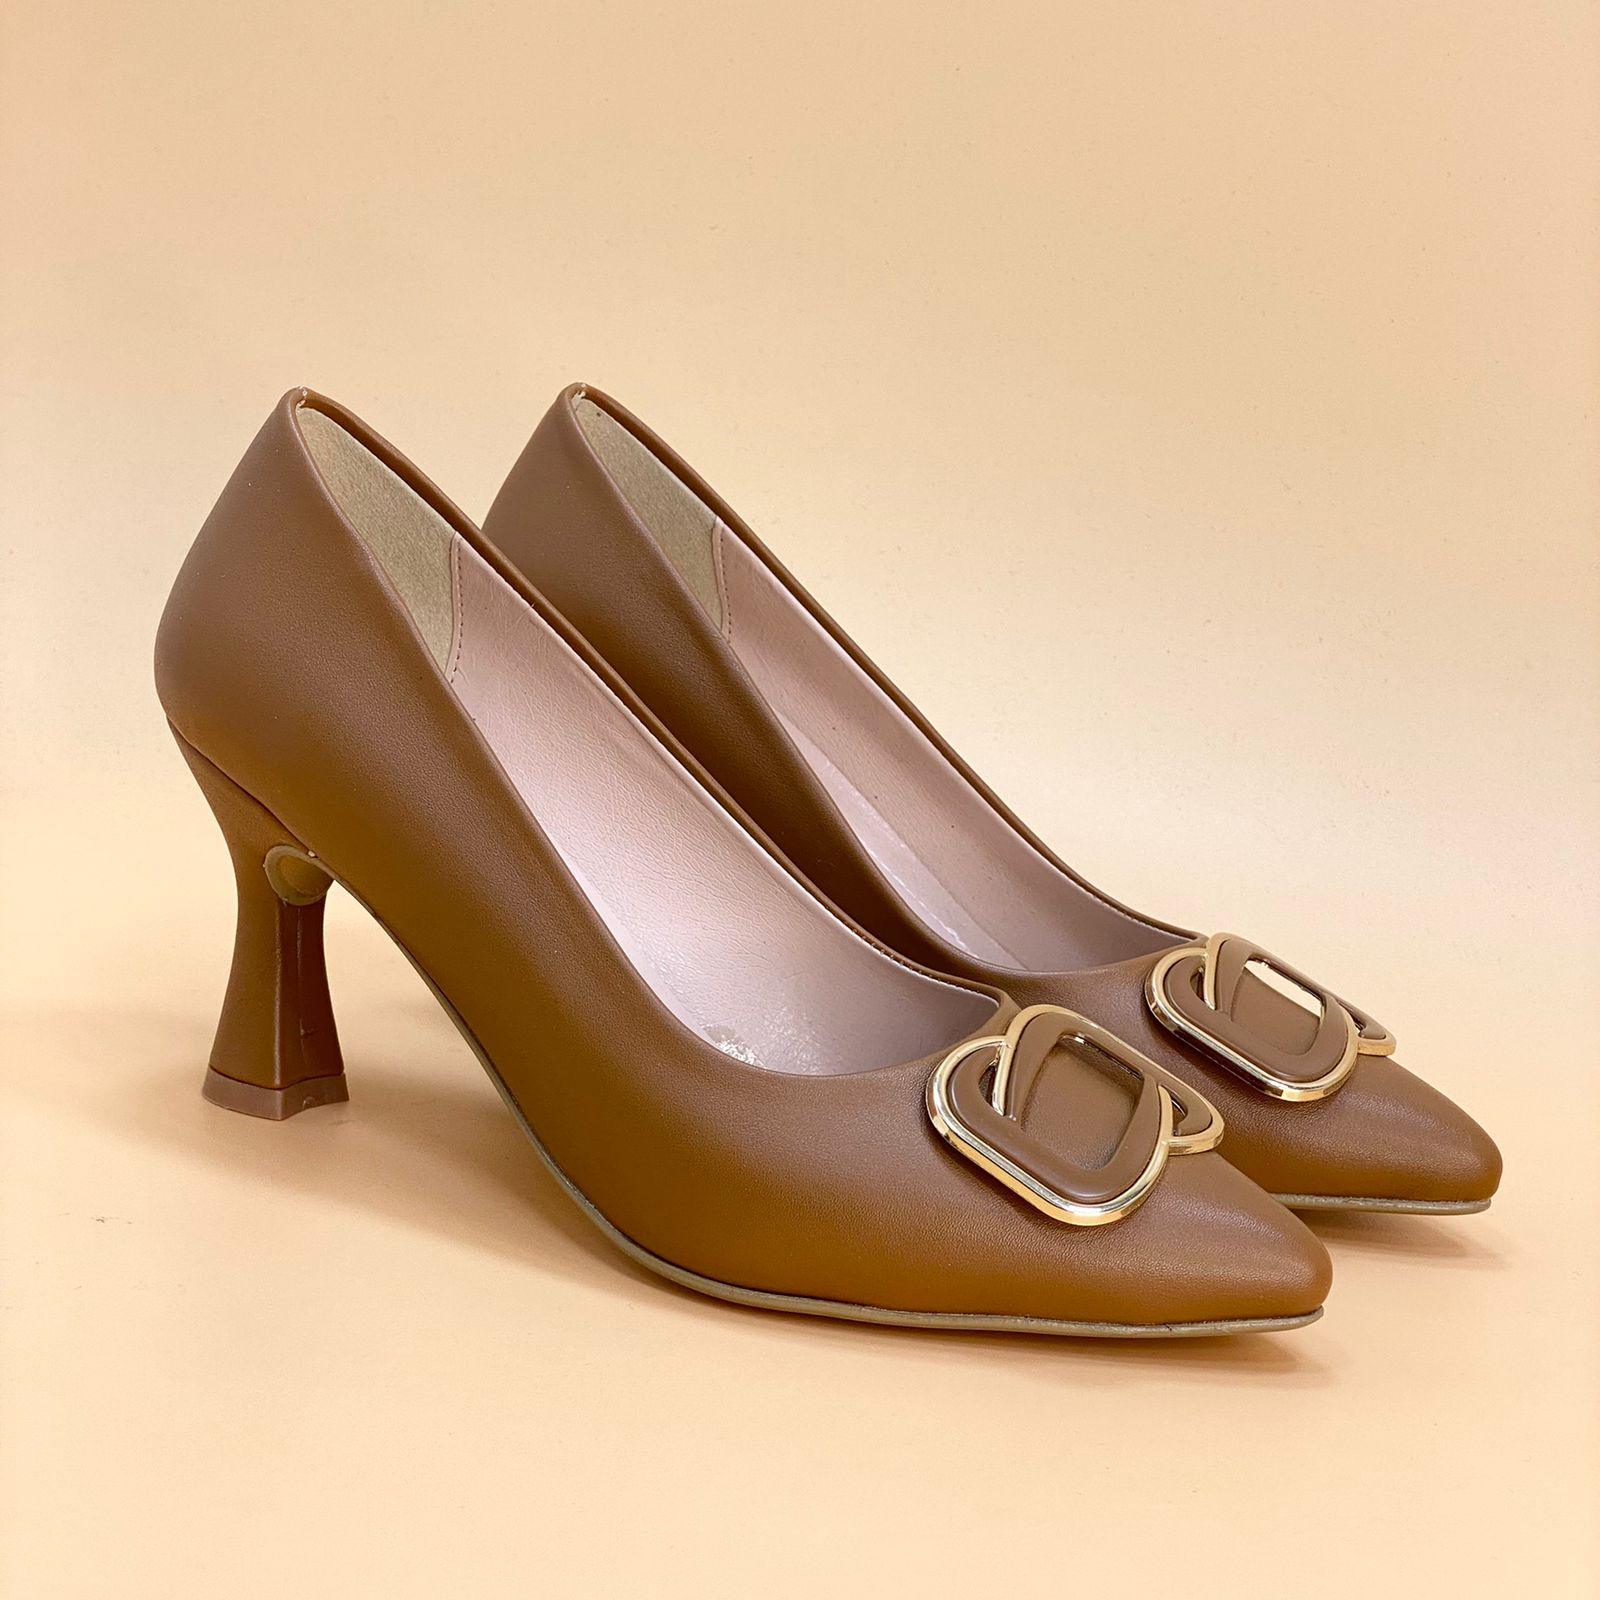 NEW ,  WOMEN SHOES HEELS W806 - Olive Tree Shoes 